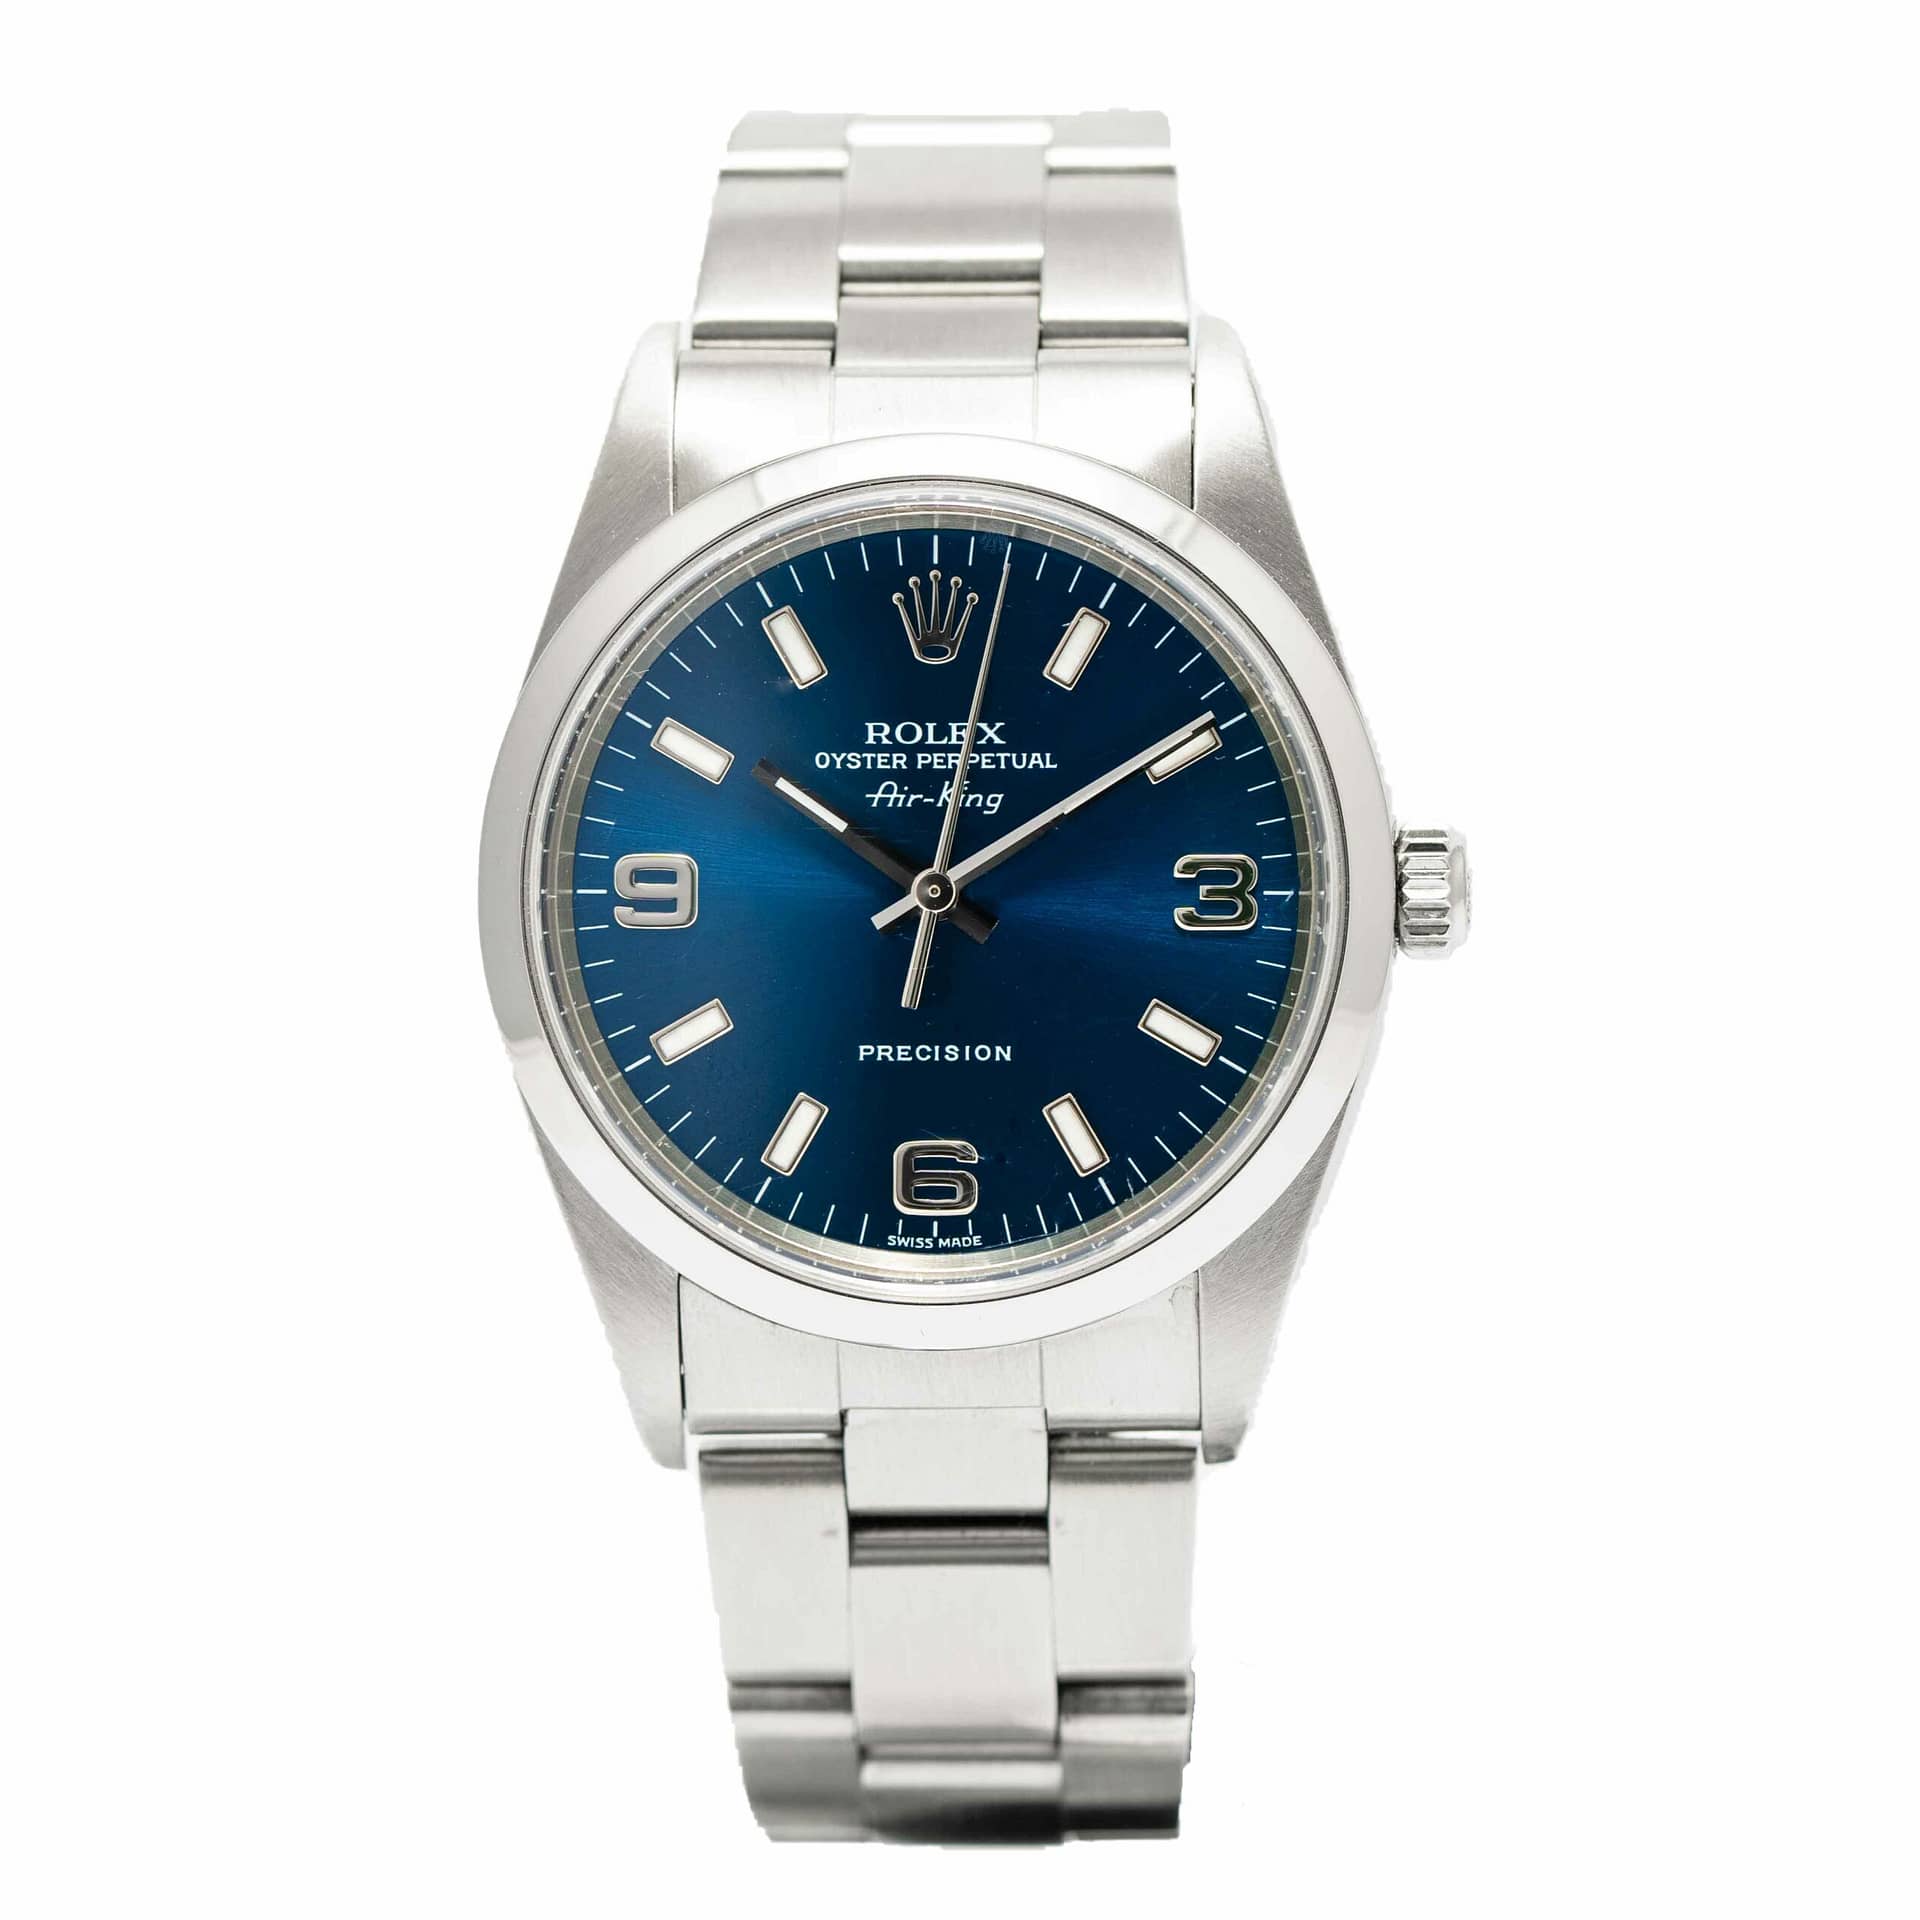 Rolex Perpetual Precision Blue Dial Stainless Steel (14000M) — Shreve, Crump & Low